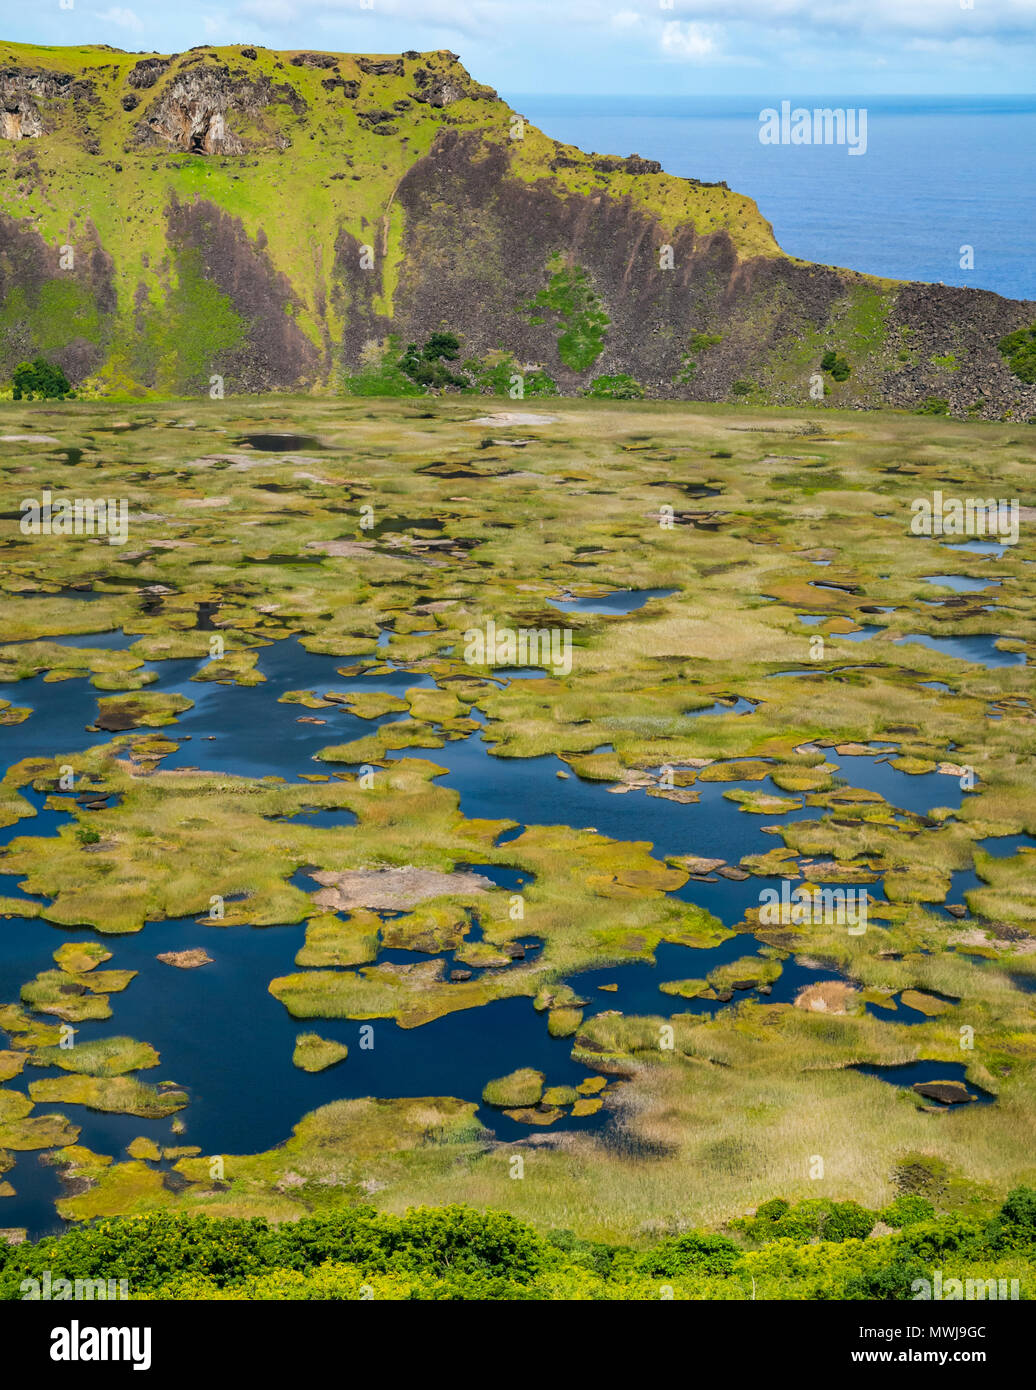 Crater rim, Rano Kau extinct volcano, with wetland in crater, Easter Island, Rapa Nui, Chile Stock Photo